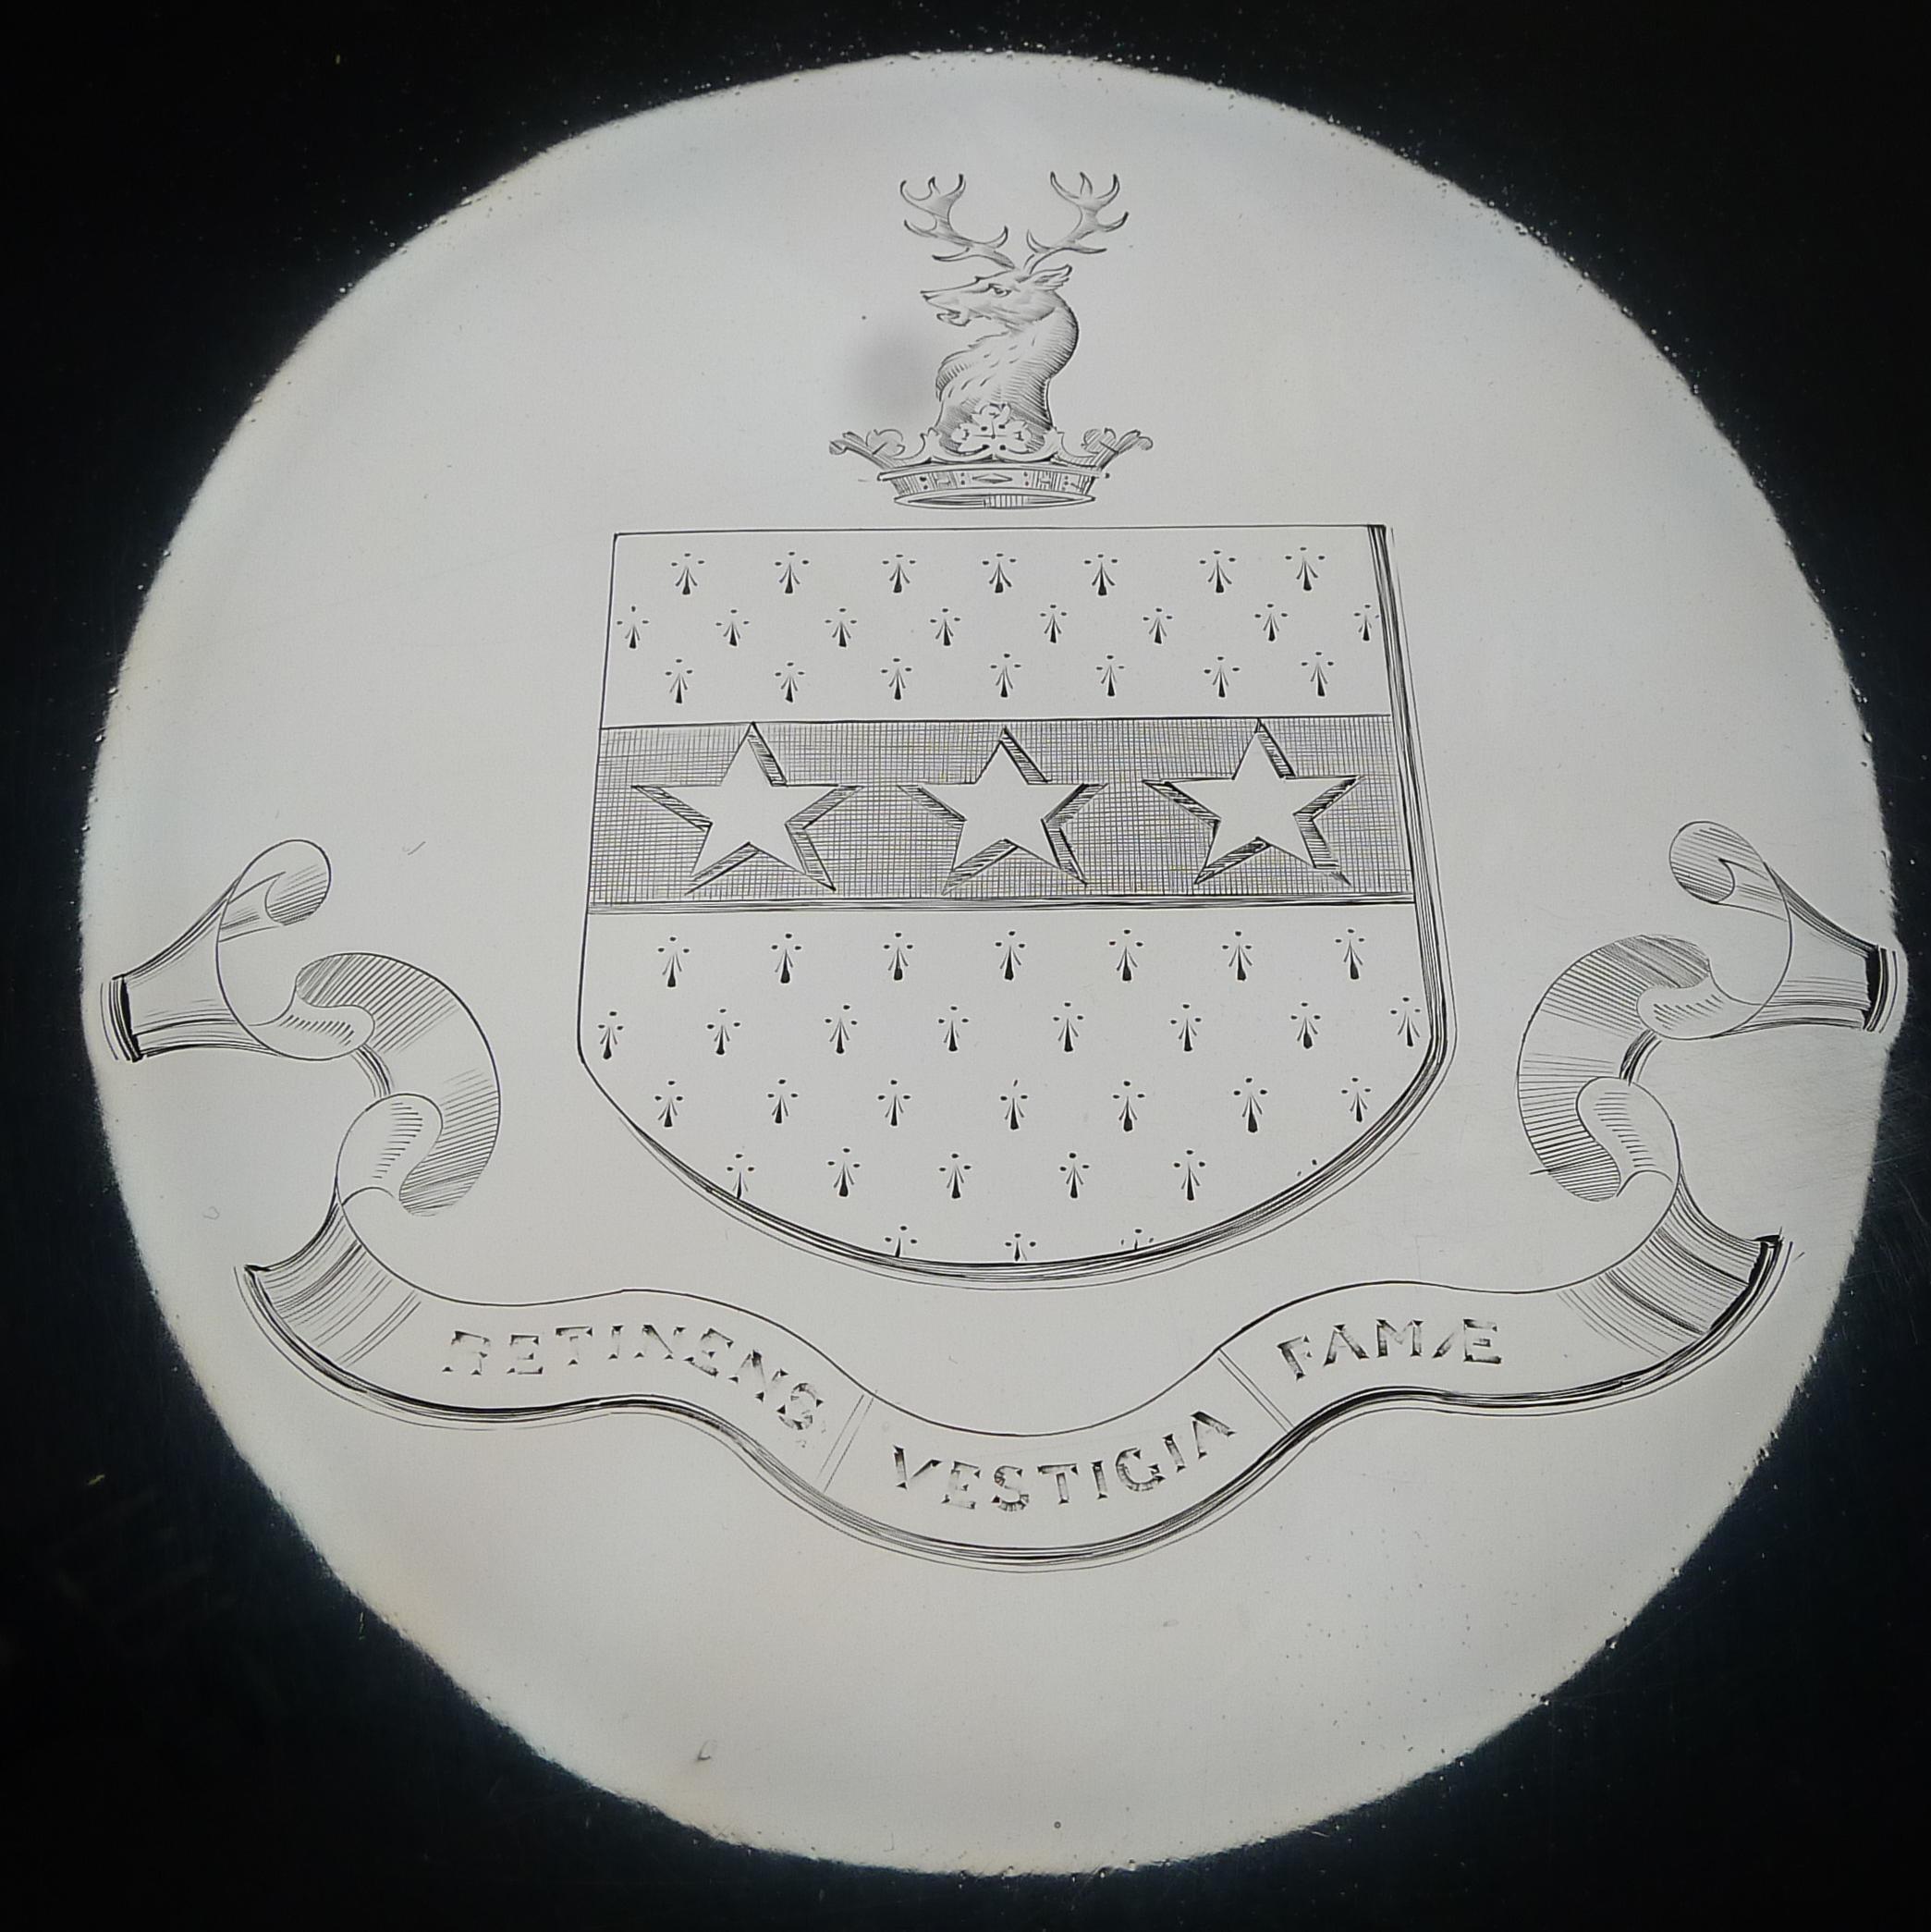 British Rare Enormous Silver Plated Salver / Tray C.1900, Lister Family Crest For Sale